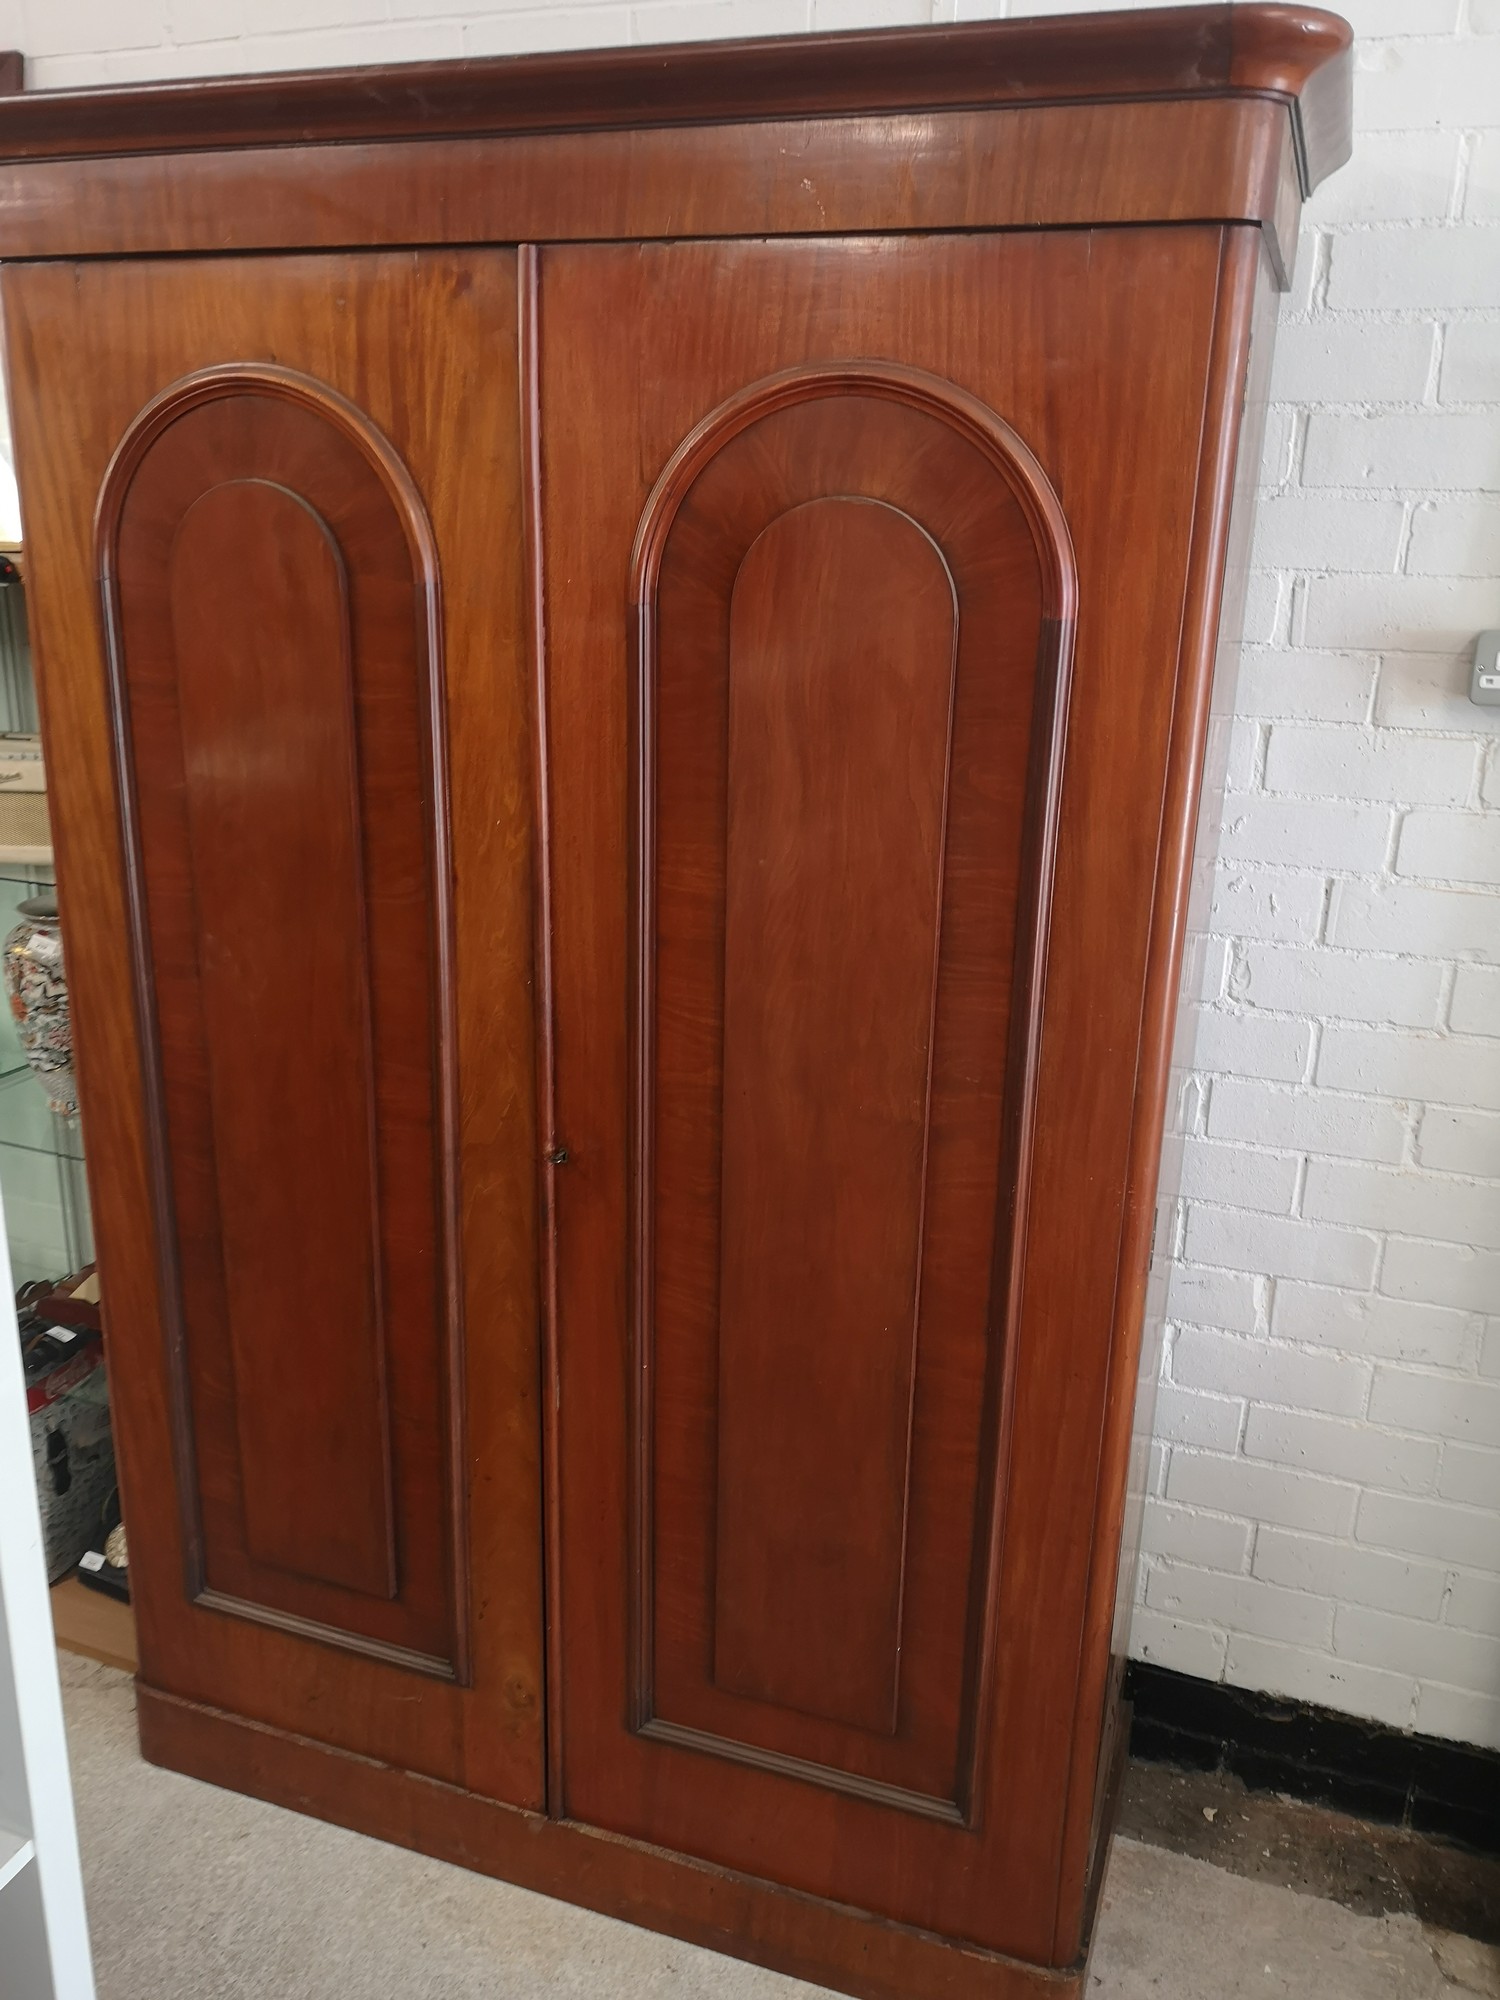 Large Victorian bow fronted wardrobe with fitted drawers and coat hangers. - Image 2 of 3